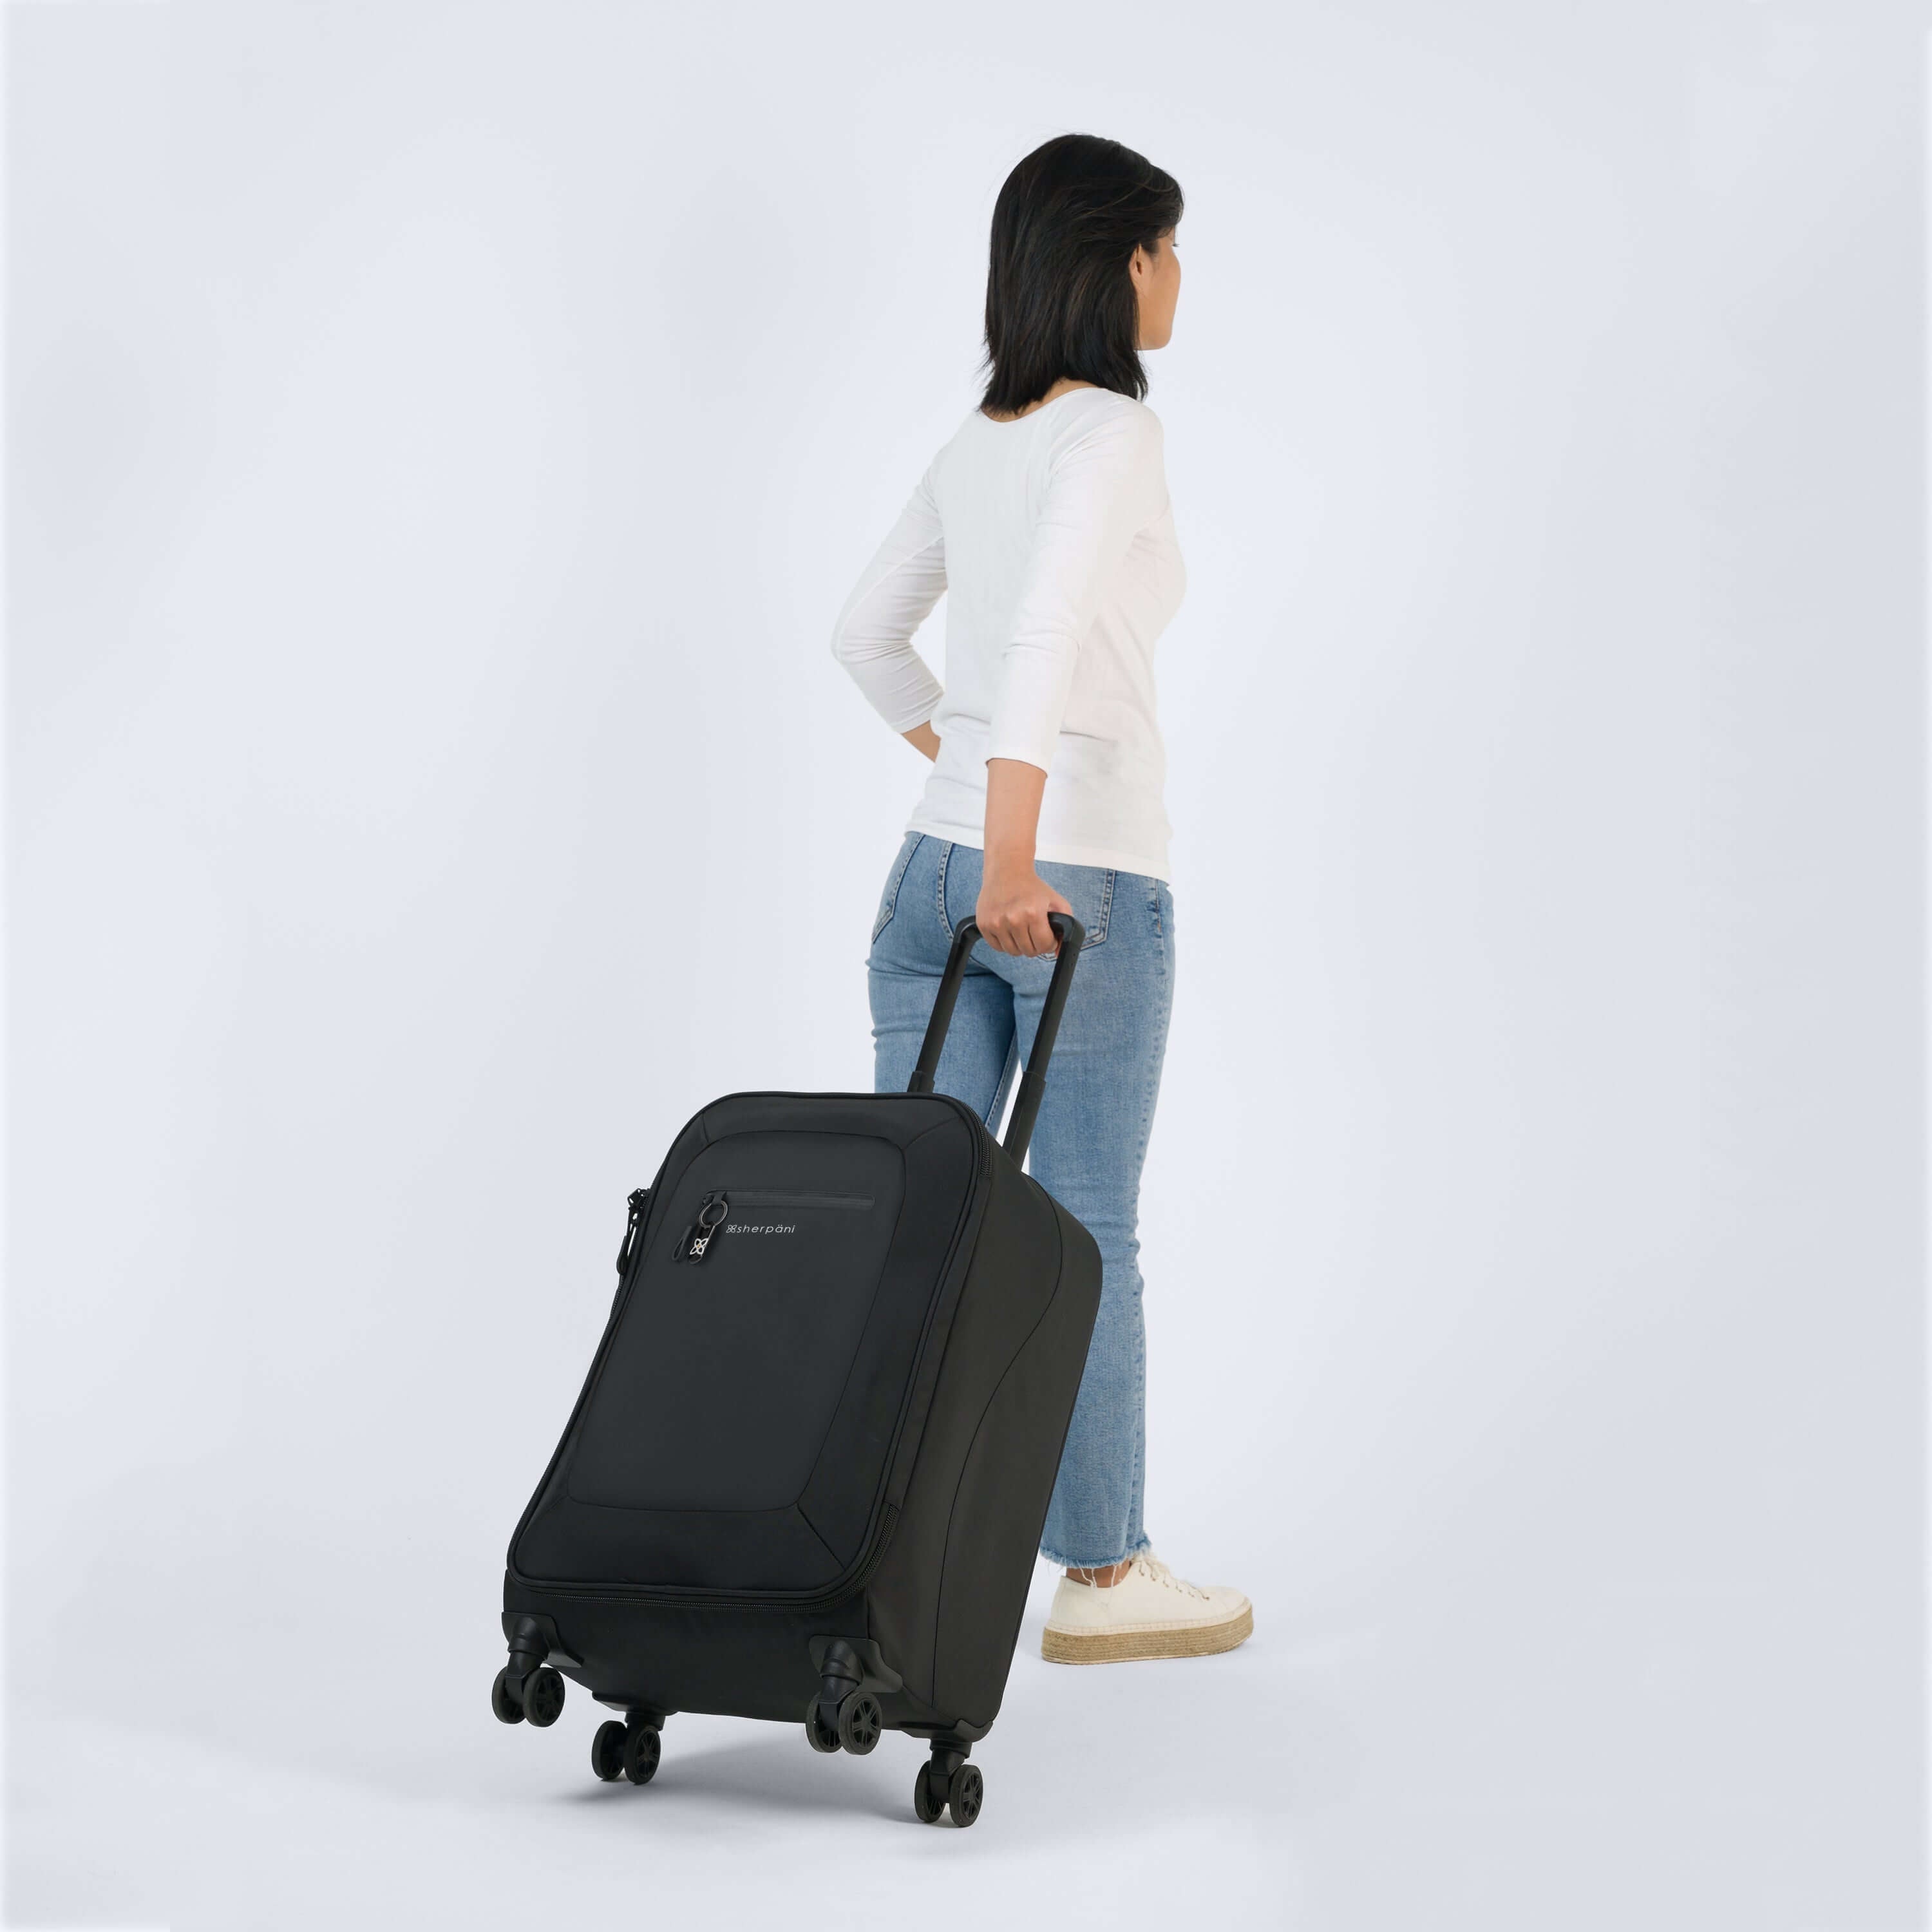 Full body view of a dark haired model facing away from the camera. She is wearing a white shirt, jeans, and white shoes. She is pulling Sherpani's Anti-Theft luggage, the Hemisphere in Carbon, along behind her. 